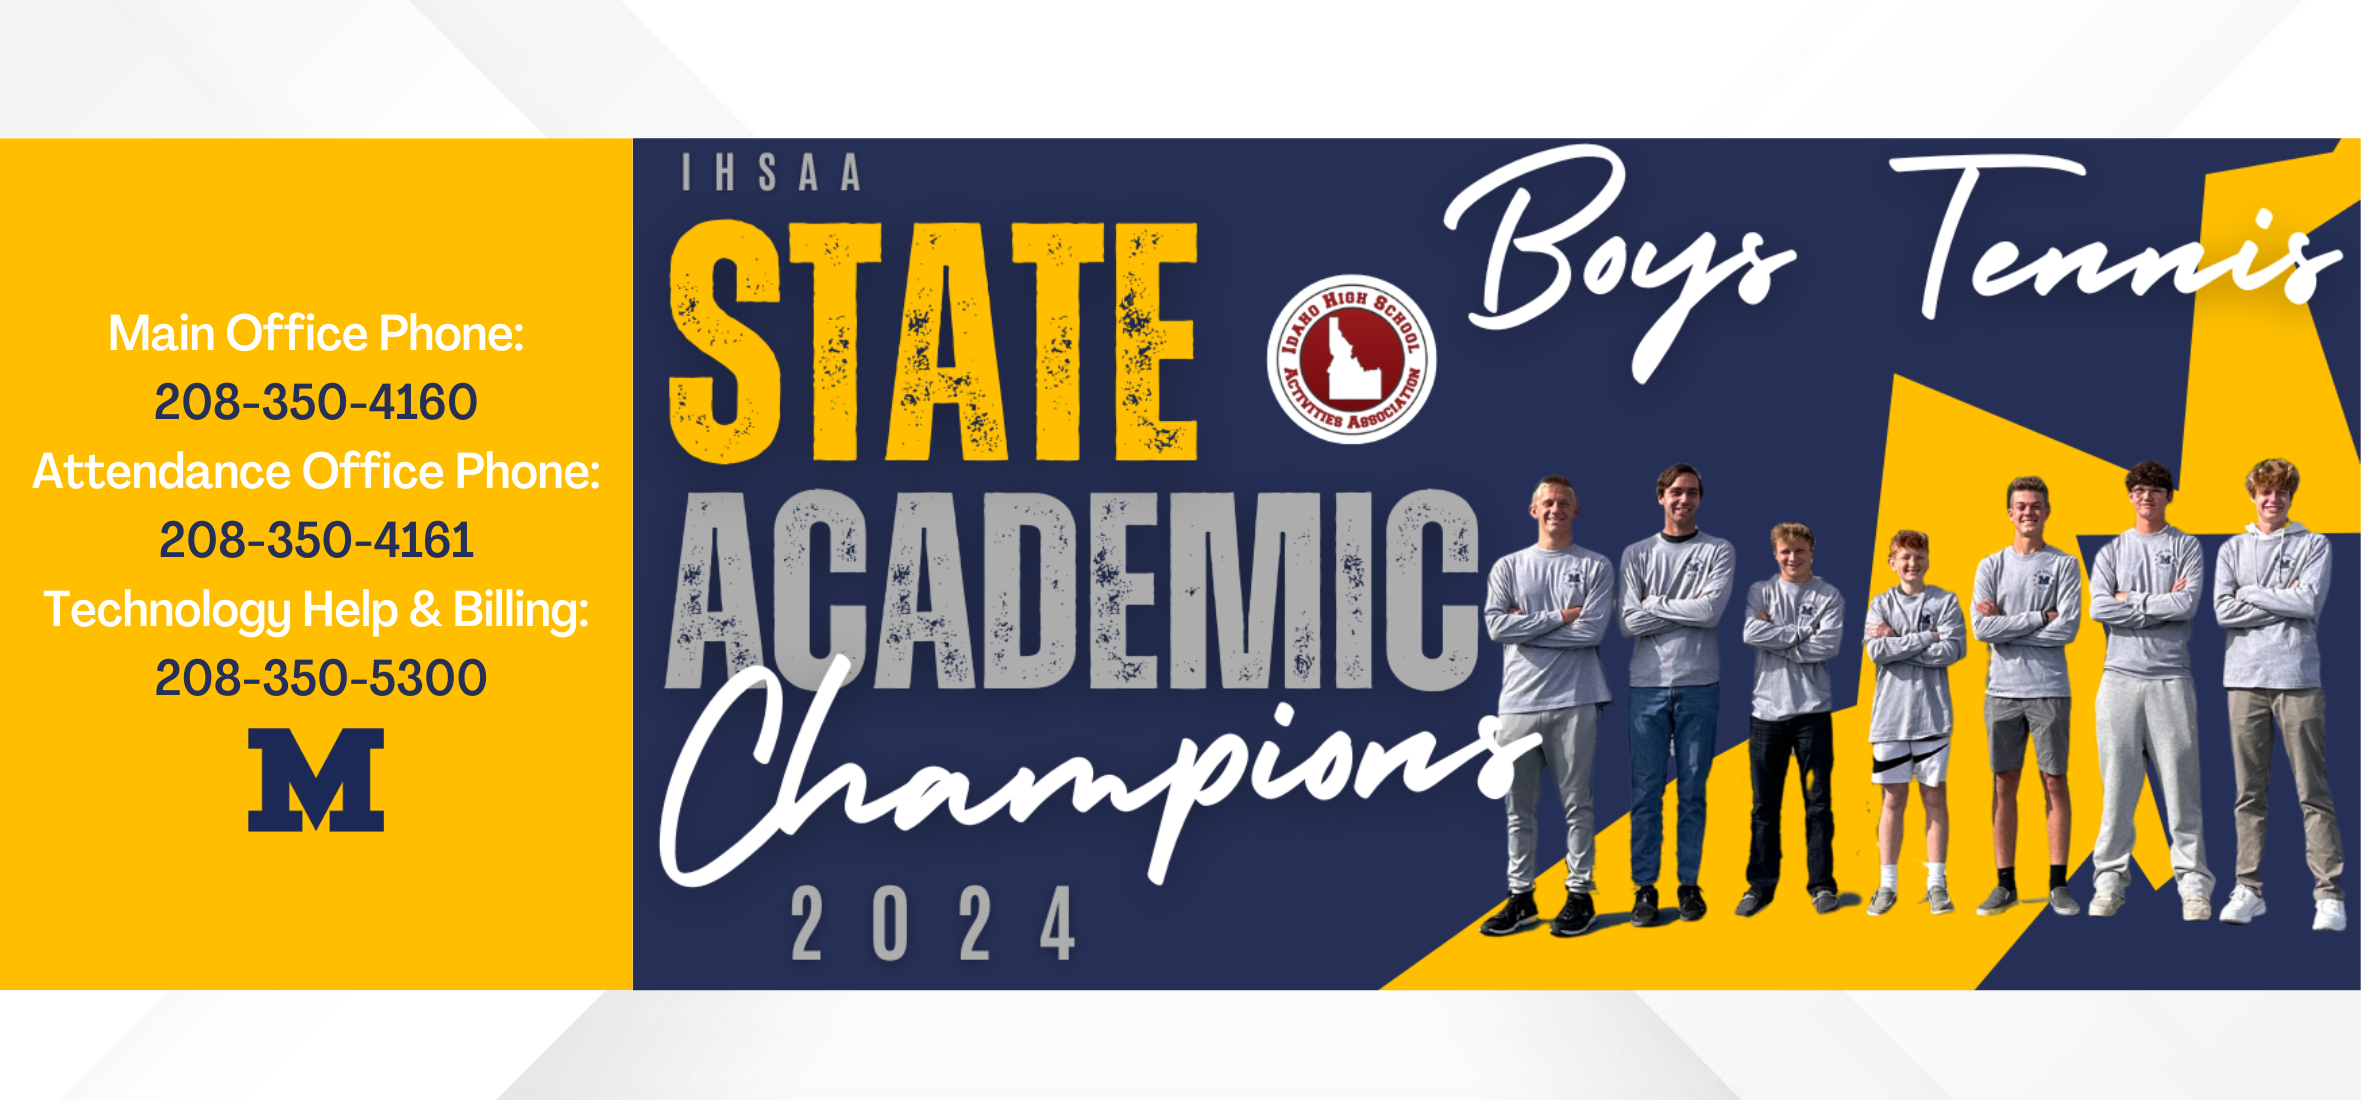 Boys Tennis- 2024 5A Academic State Champions